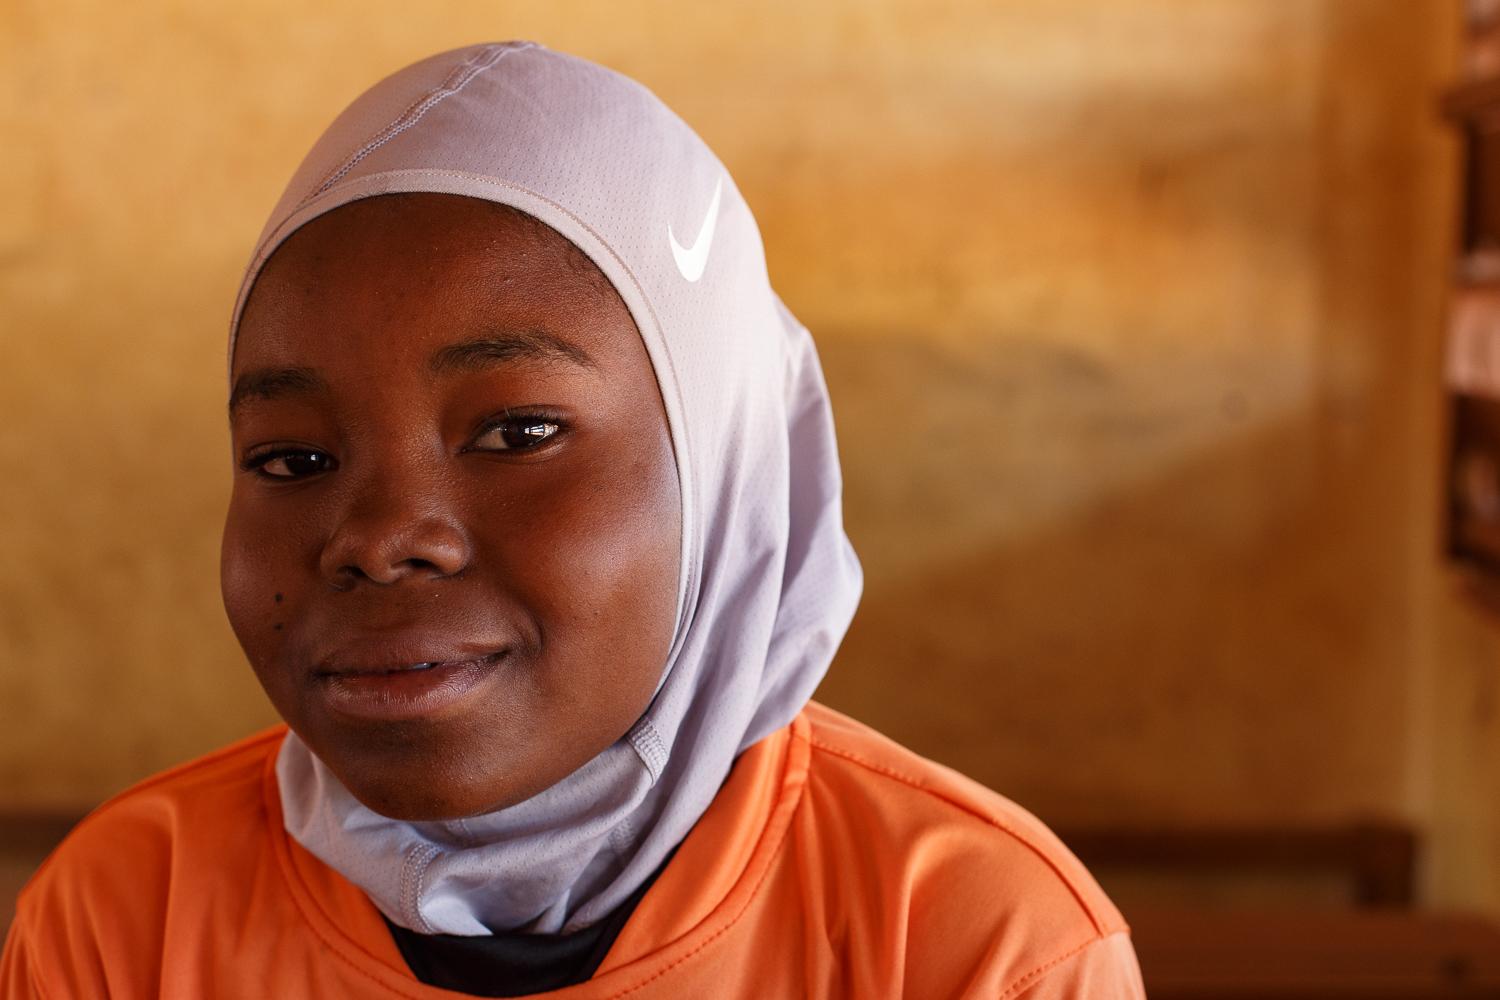 Image from Faith and Football - Khadija, 13 years old, poses for a photograph in a Nike...